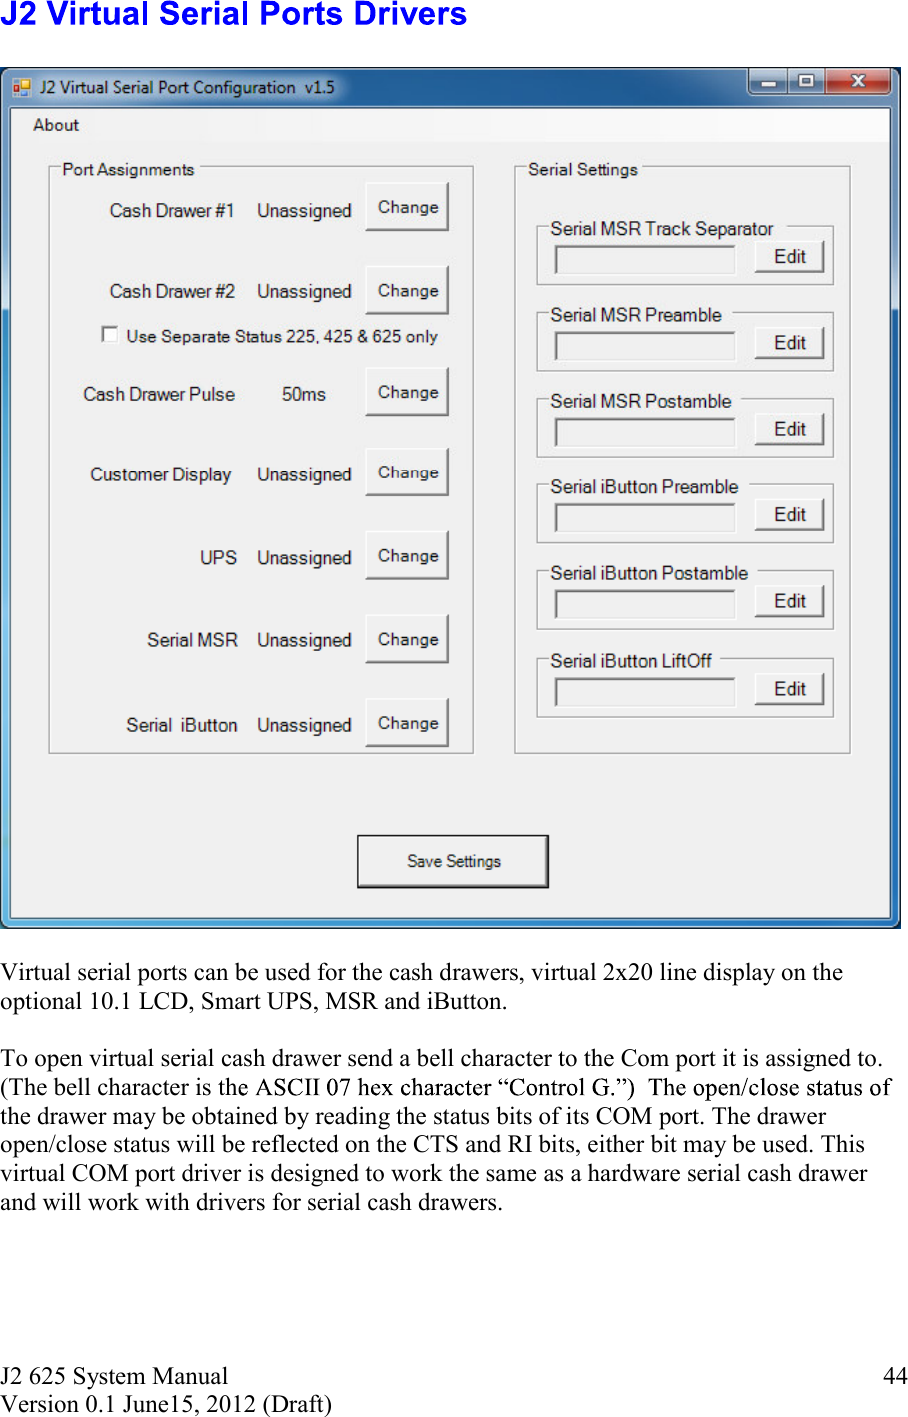 J2 625 System Manual Version 0.1 June15, 2012 (Draft)     44    Virtual serial ports can be used for the cash drawers, virtual 2x20 line display on the optional 10.1 LCD, Smart UPS, MSR and iButton.    To open virtual serial cash drawer send a bell character to the Com port it is assigned to.  (The bell character is ththe drawer may be obtained by reading the status bits of its COM port. The drawer open/close status will be reflected on the CTS and RI bits, either bit may be used. This virtual COM port driver is designed to work the same as a hardware serial cash drawer and will work with drivers for serial cash drawers.    